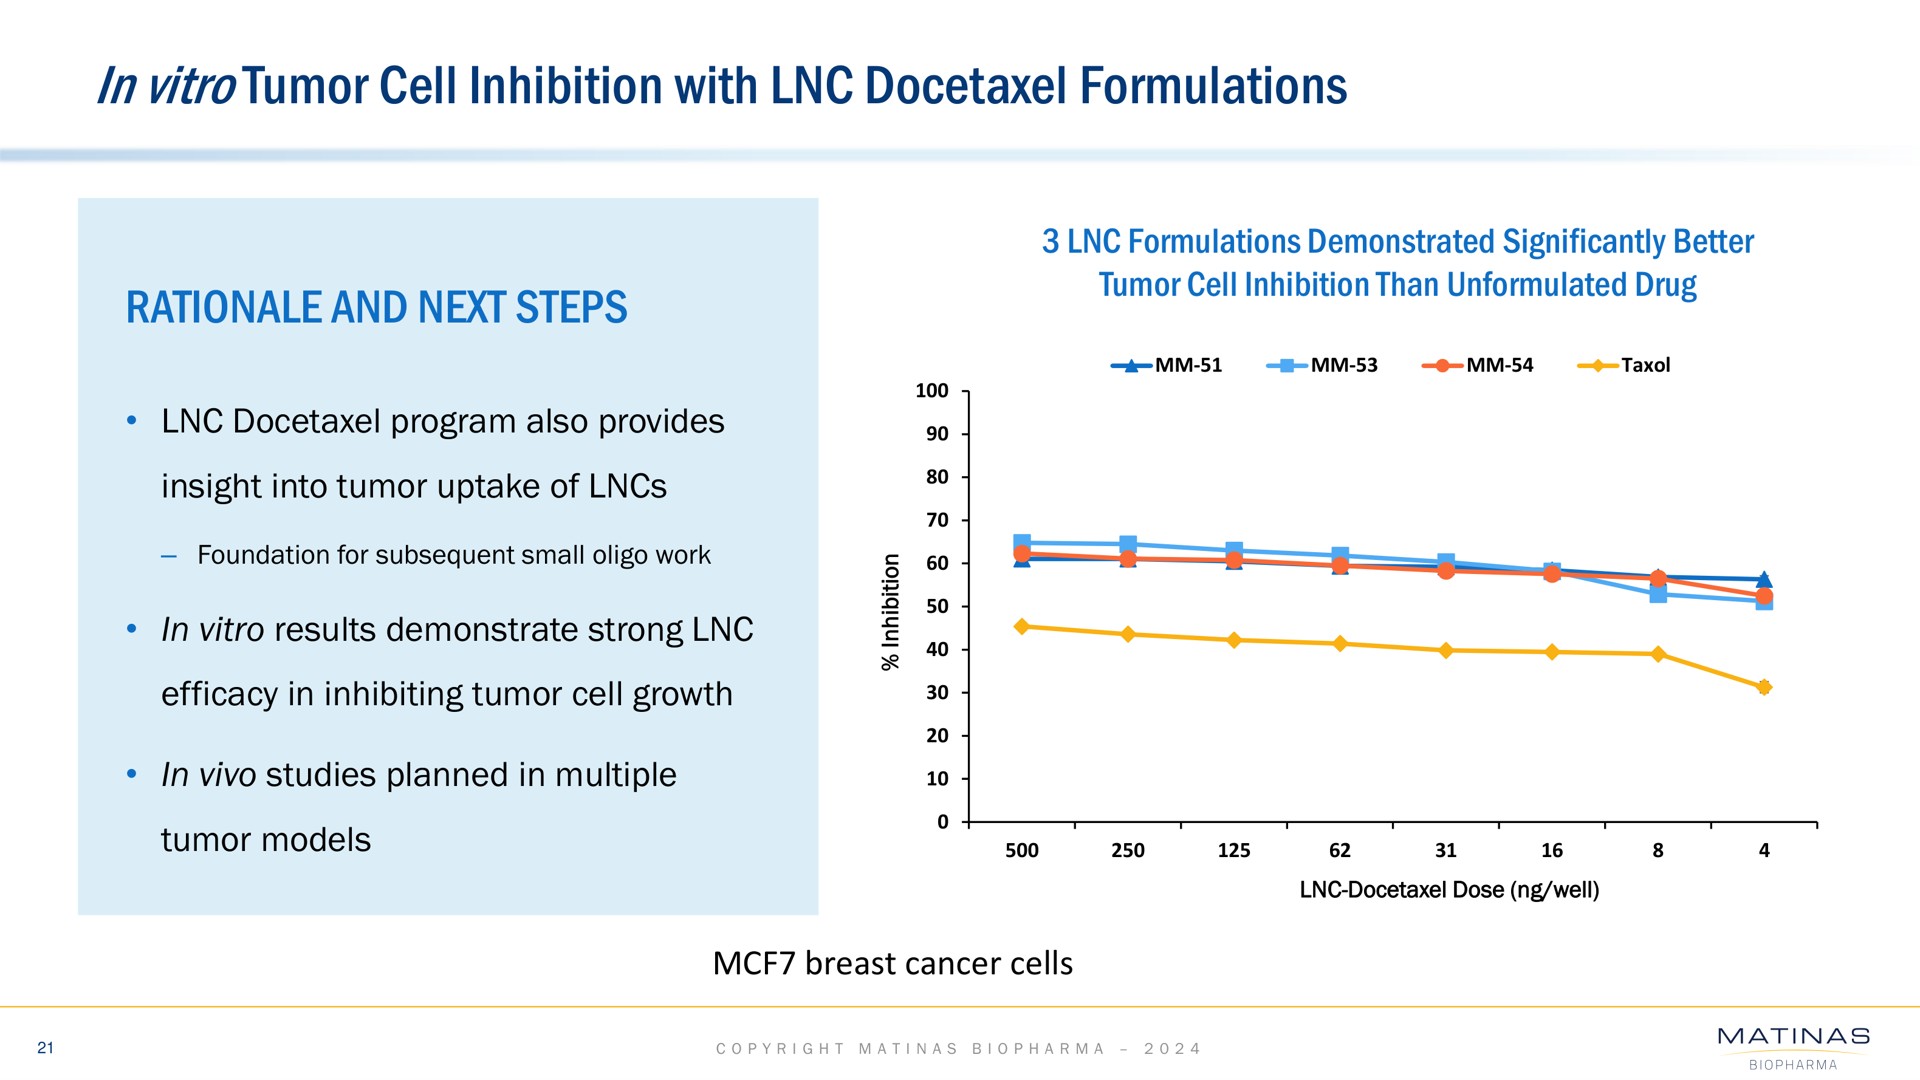 in tumor cell inhibition with formulations rationale and next steps | Matinas BioPharma